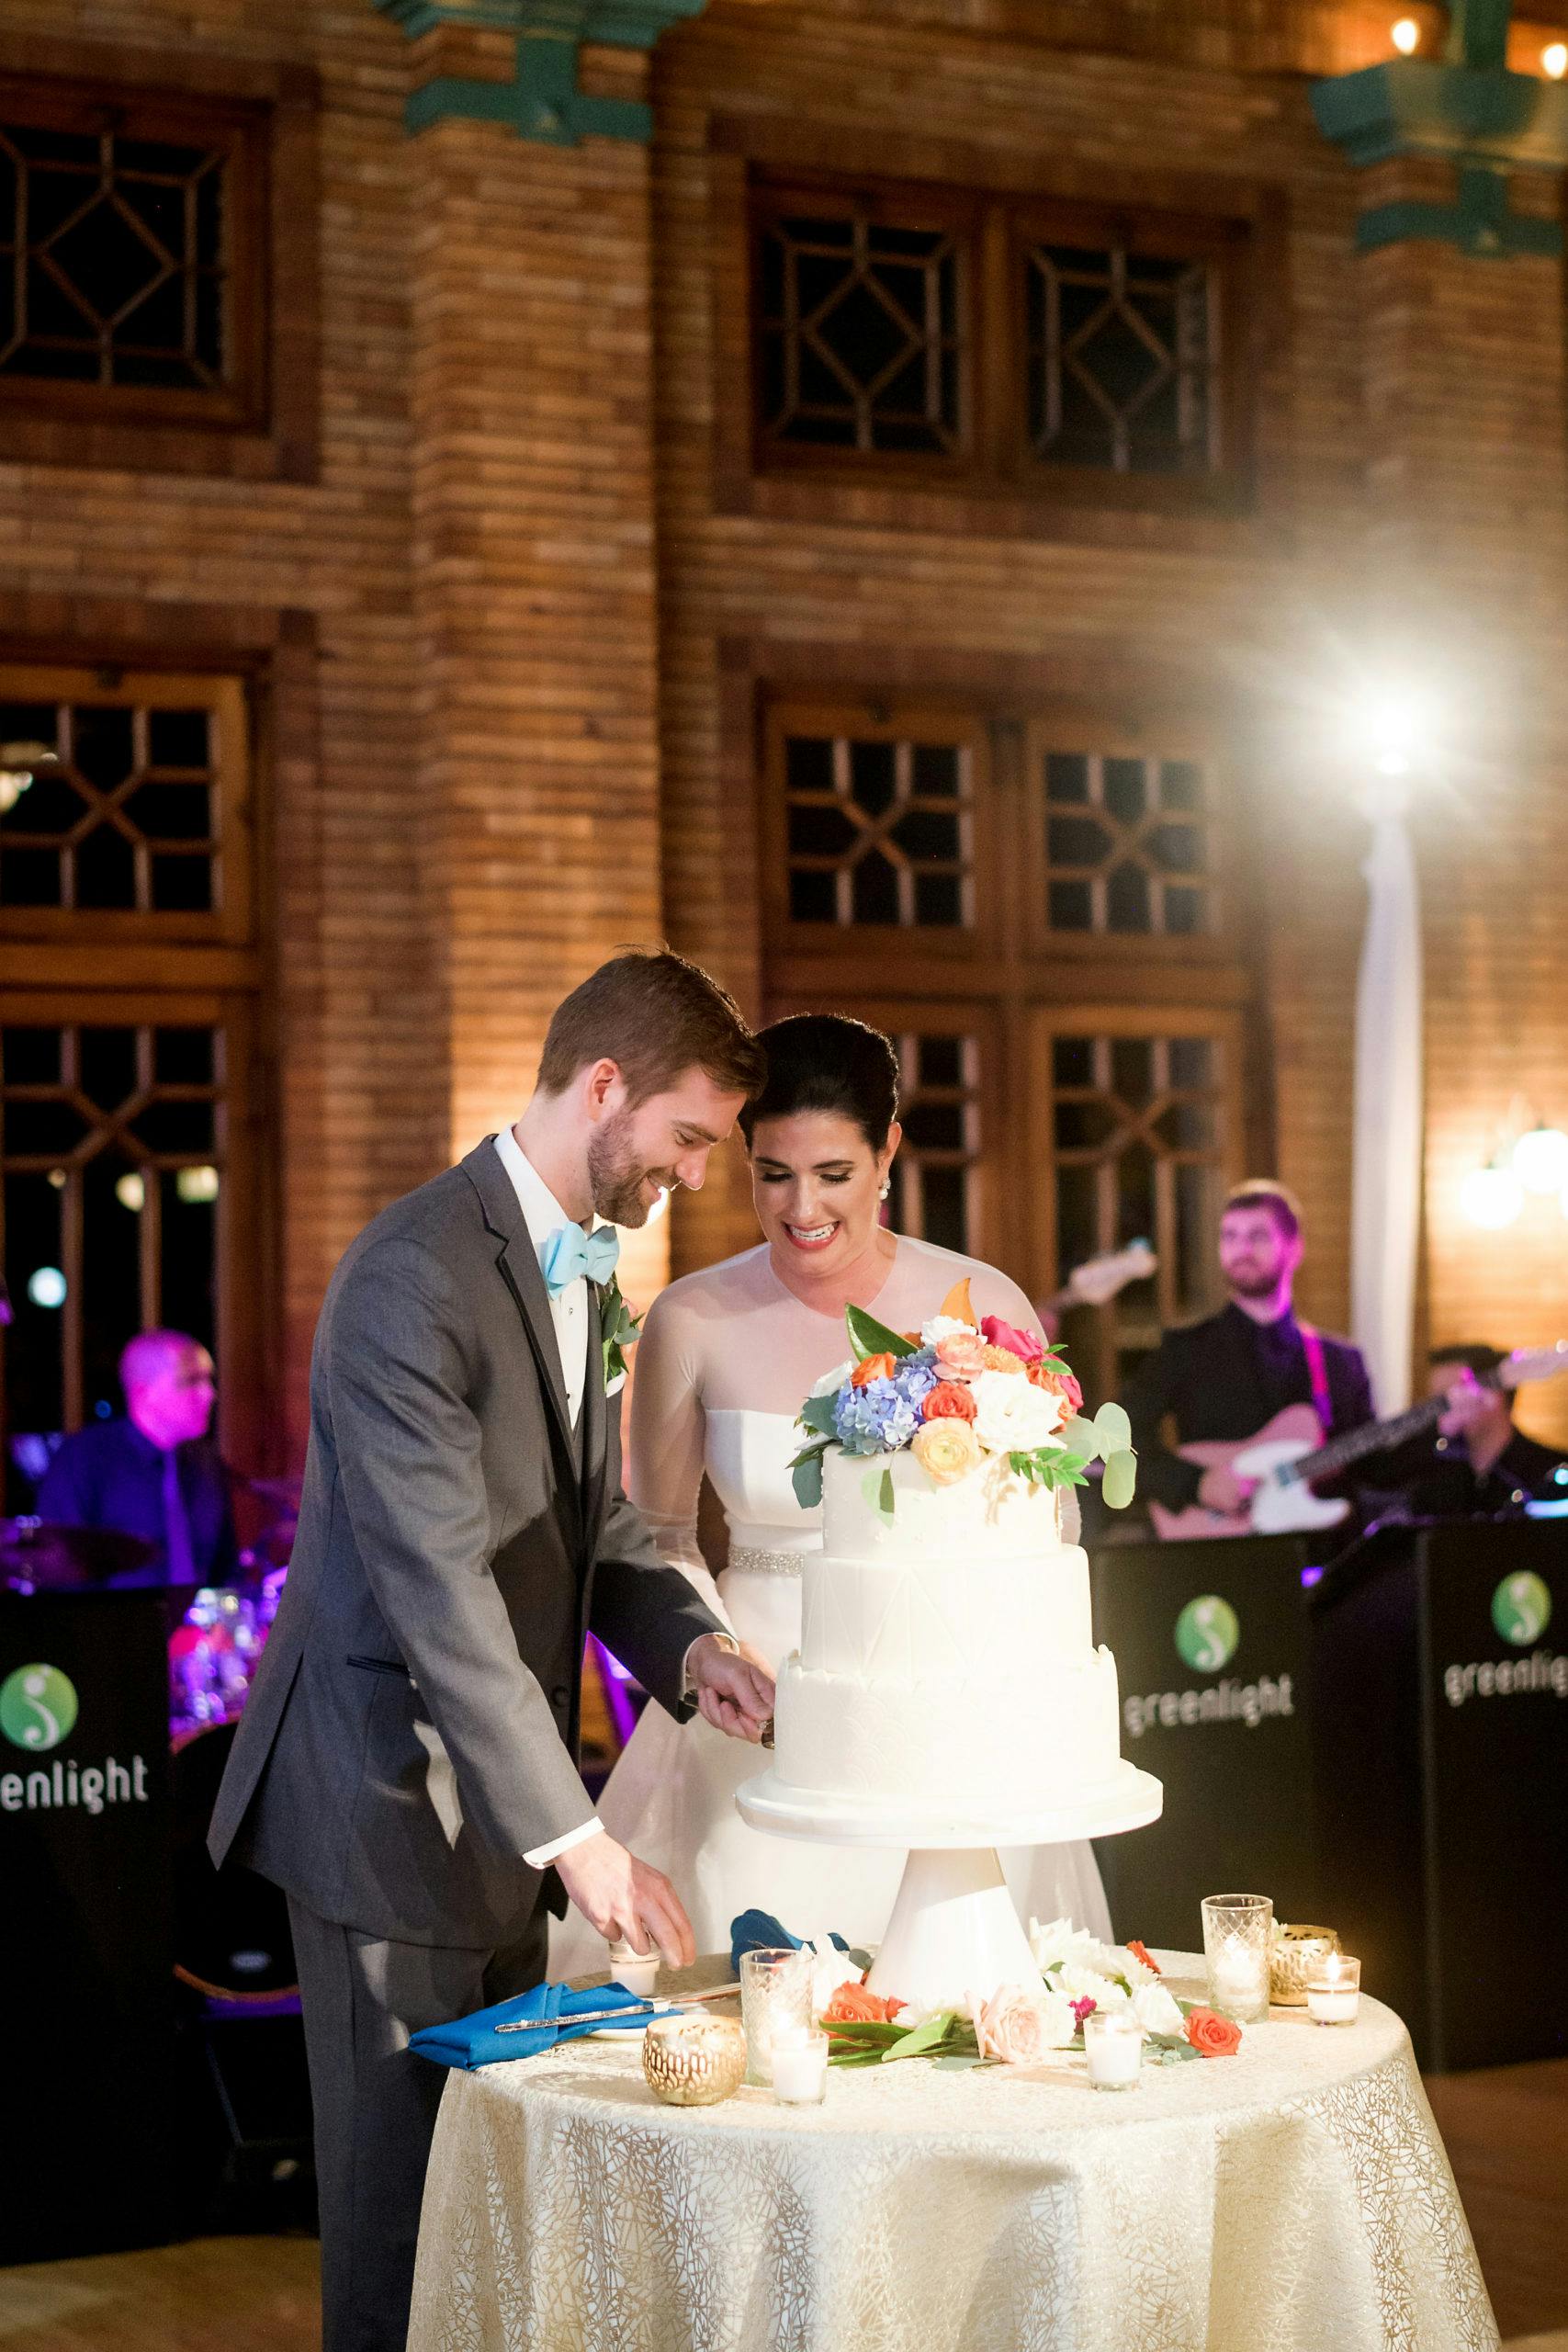 Bride and Groom Cut Cake at Wedding Planned by Storybook Weddings & Events at Café Brauer at Lincoln Park Zoo | PartySlate